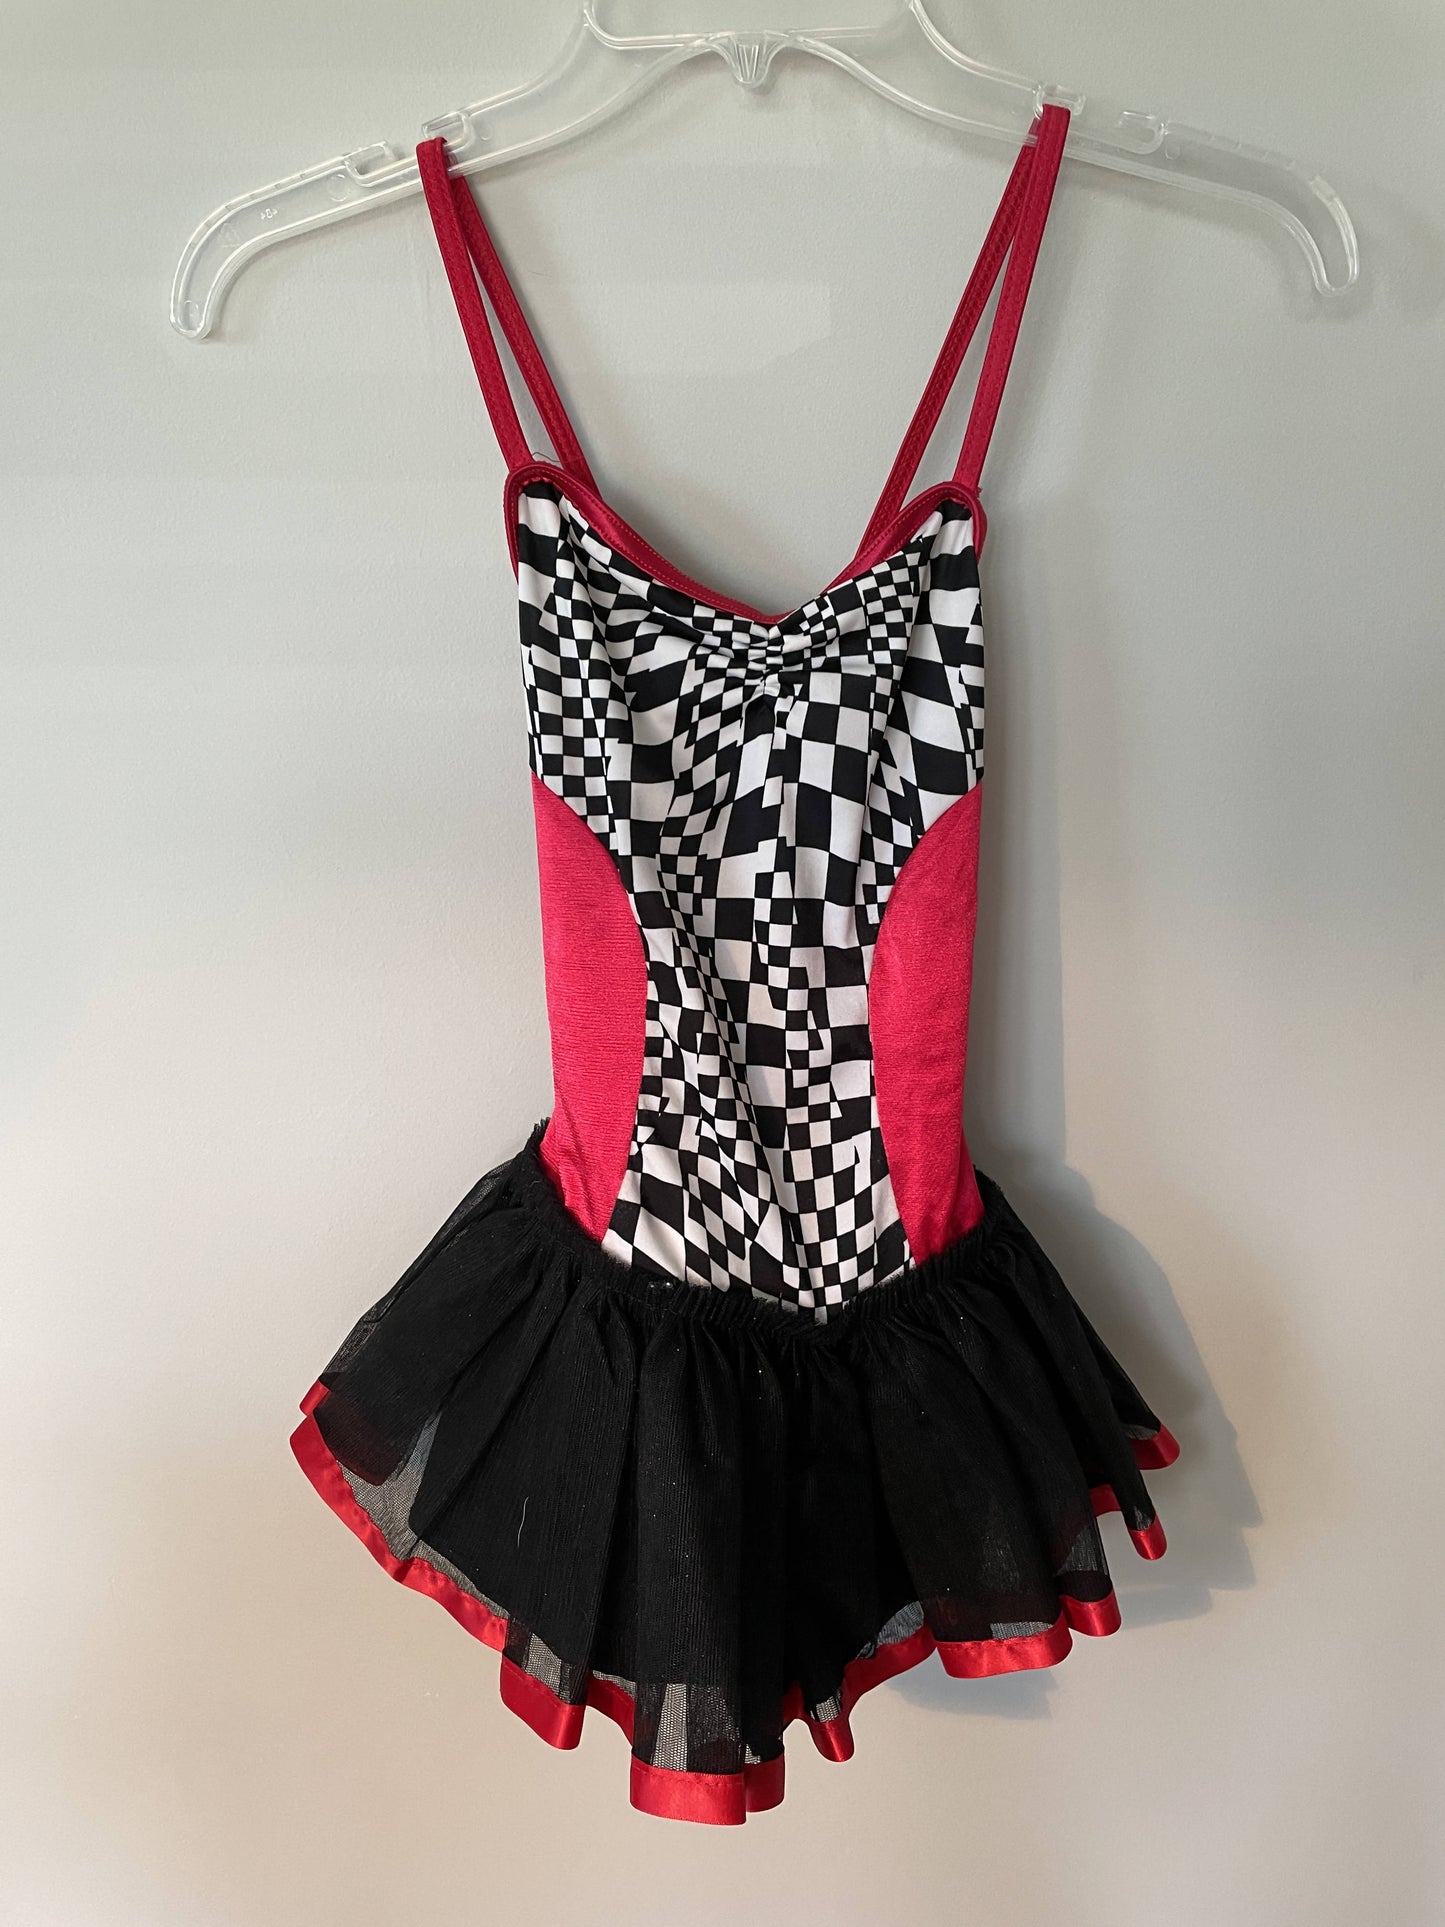 Dance dress with shorts and matching pants